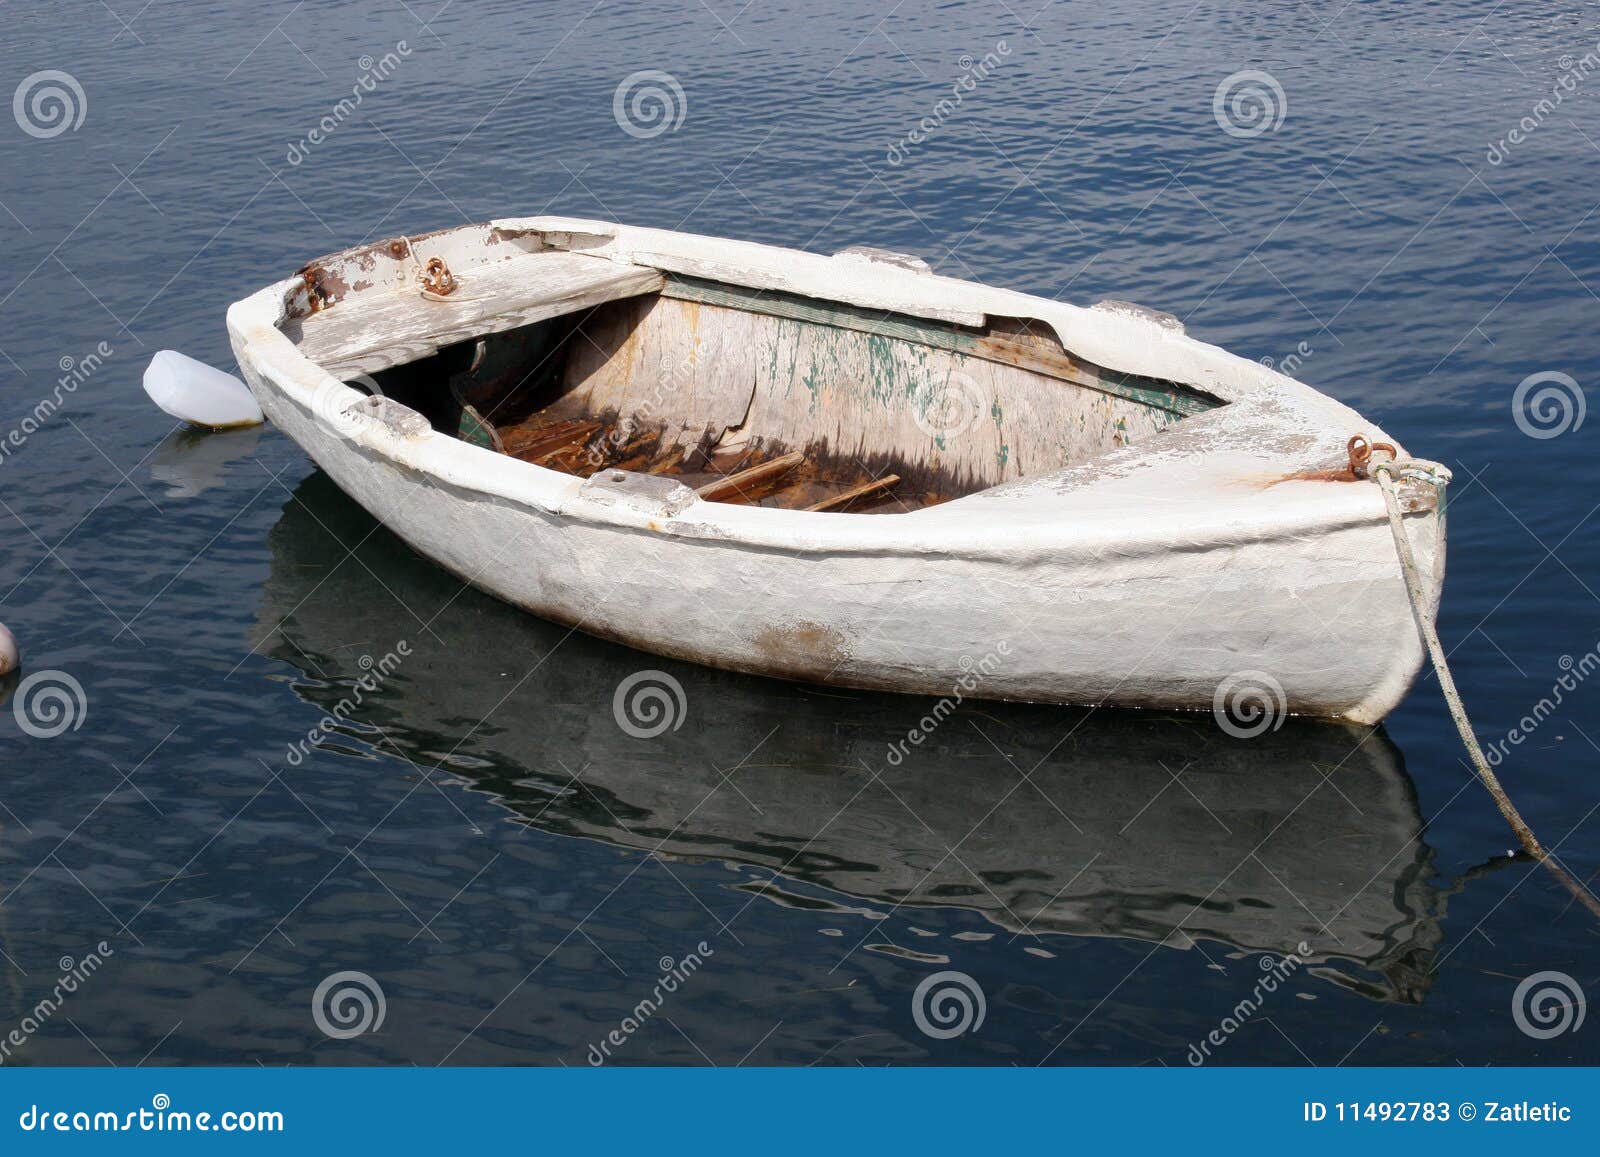 Old Rowing Boat Stock Photos - Image: 11492783